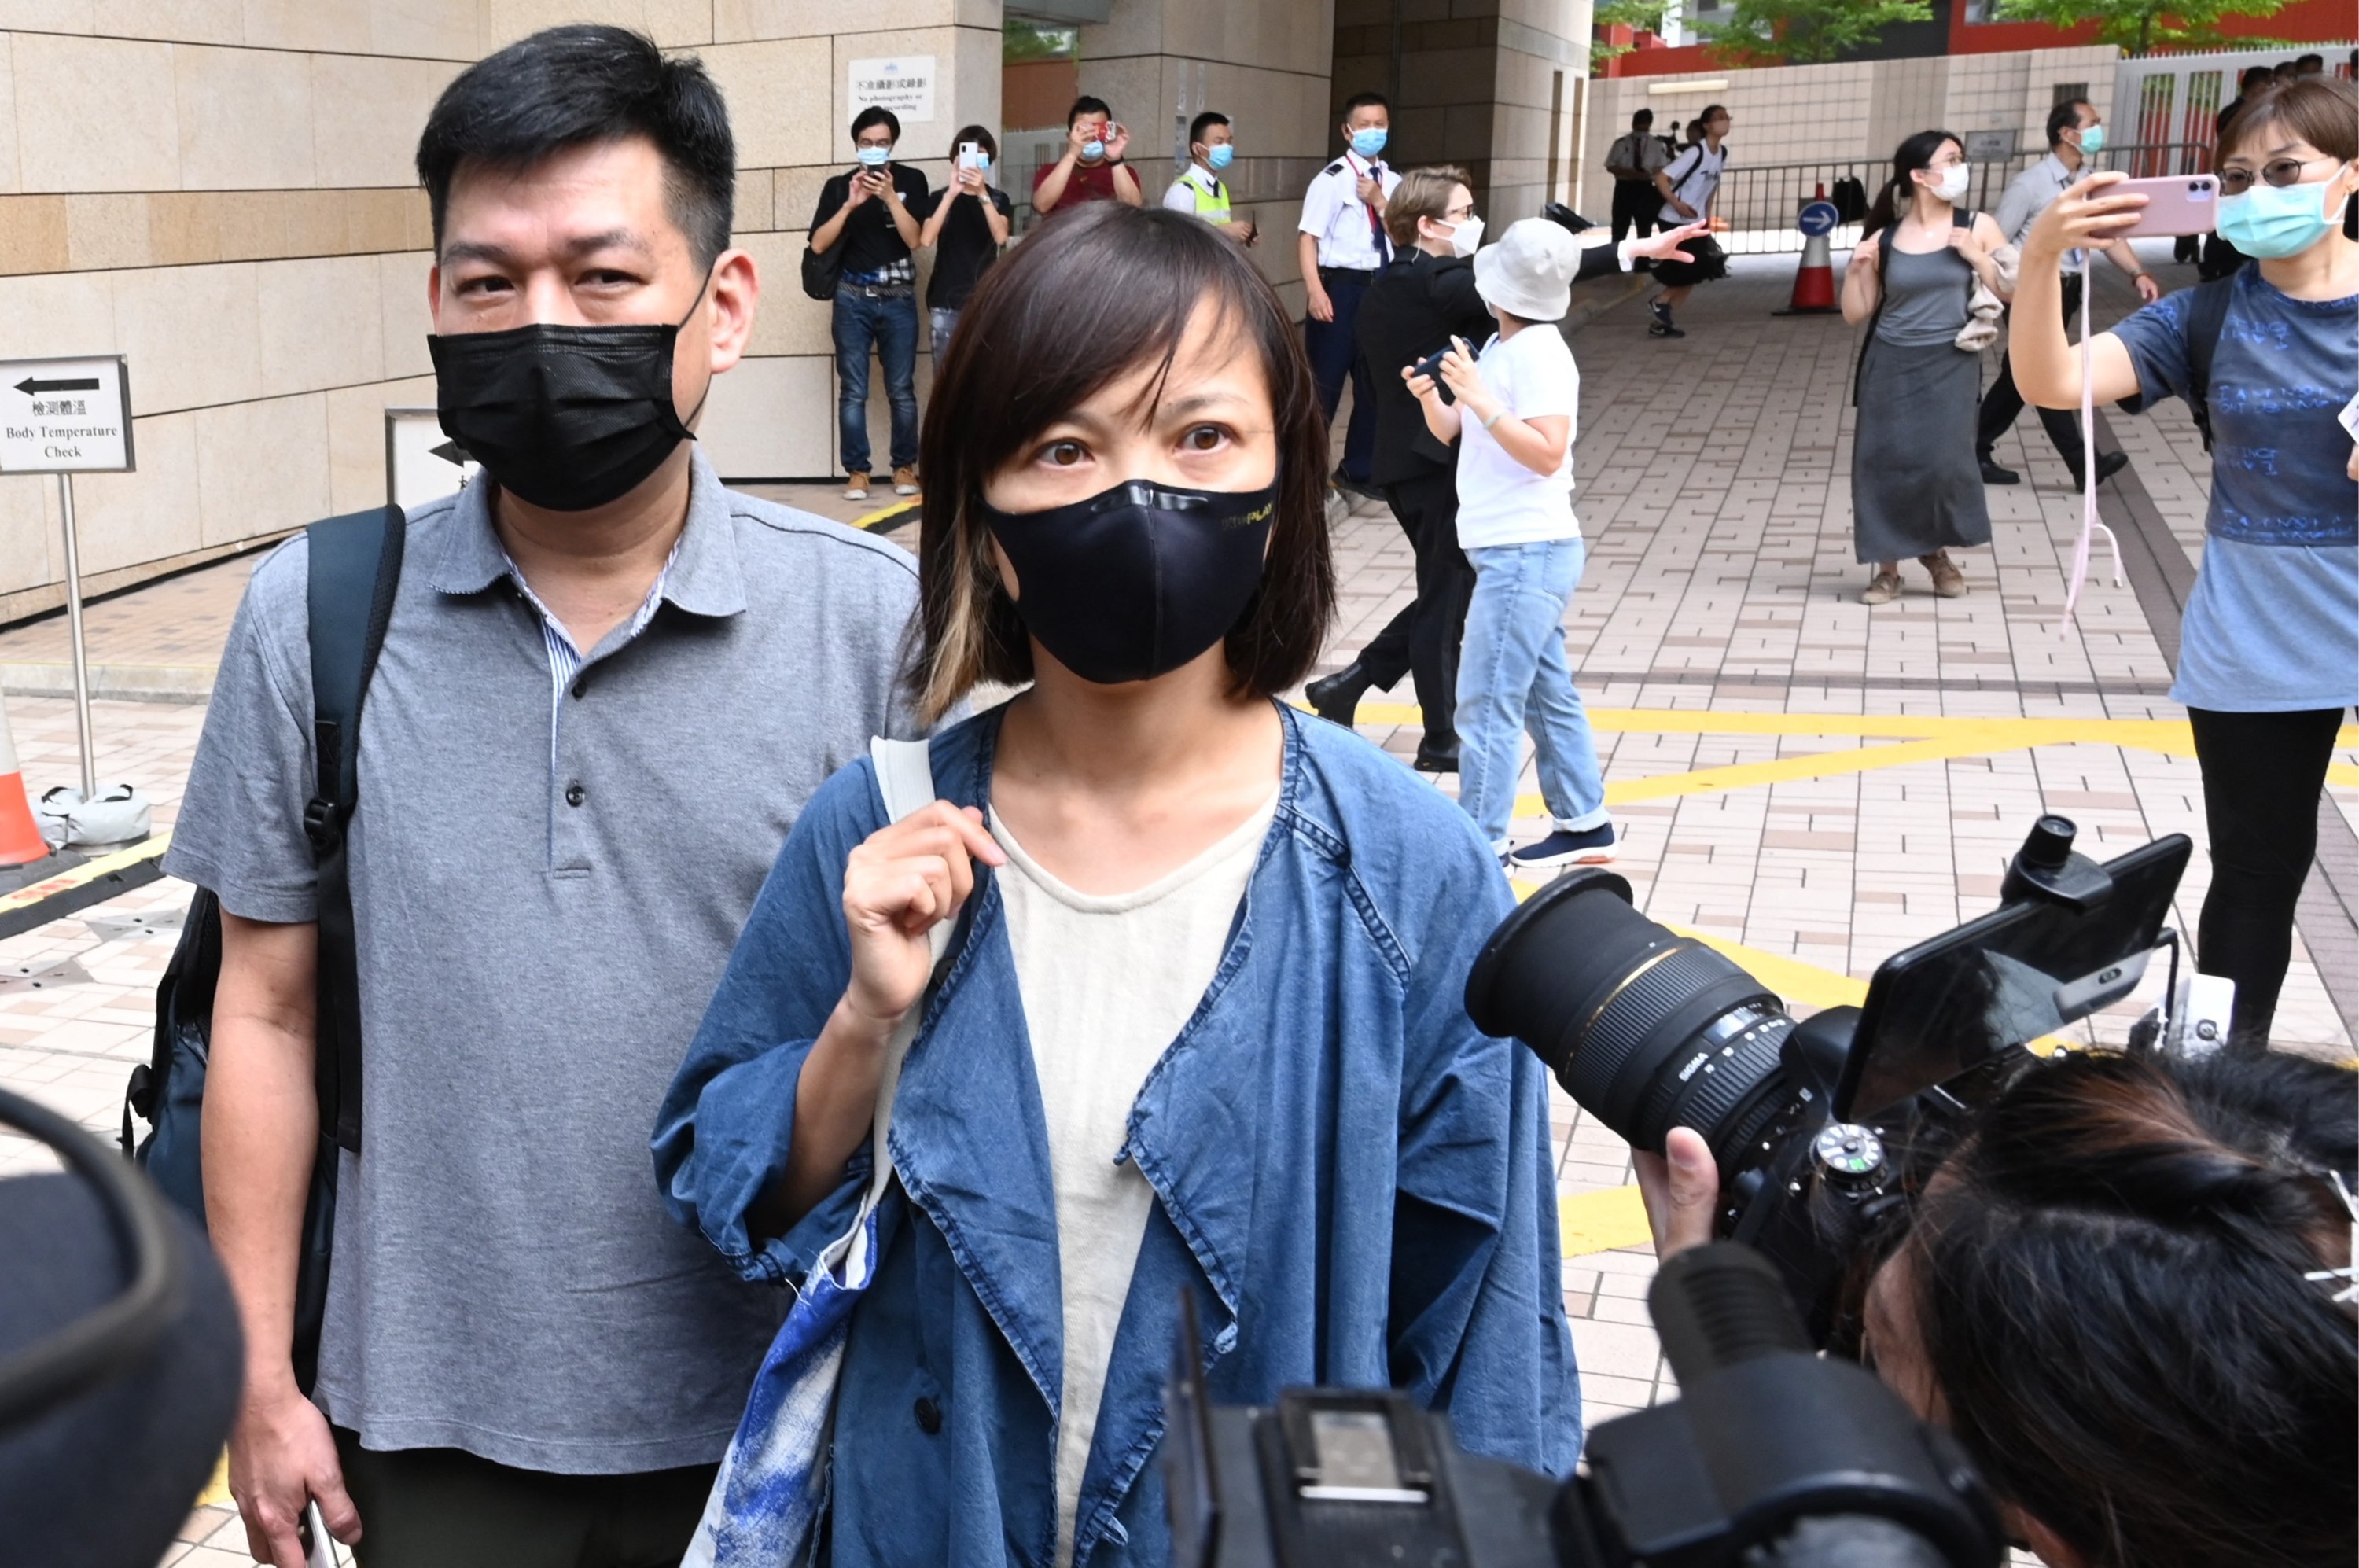 Apple Daily Deputy Dhief Editor Chan Pui-man (C) speaks to the media as she leaves court as fellow executives from the pro-democracy newspaper, Chief Editor Ryan Law and CEO Cheung Kim-hung were remanded in custody in Hong Kong, China, June 19, 2021. (AFP Photo)